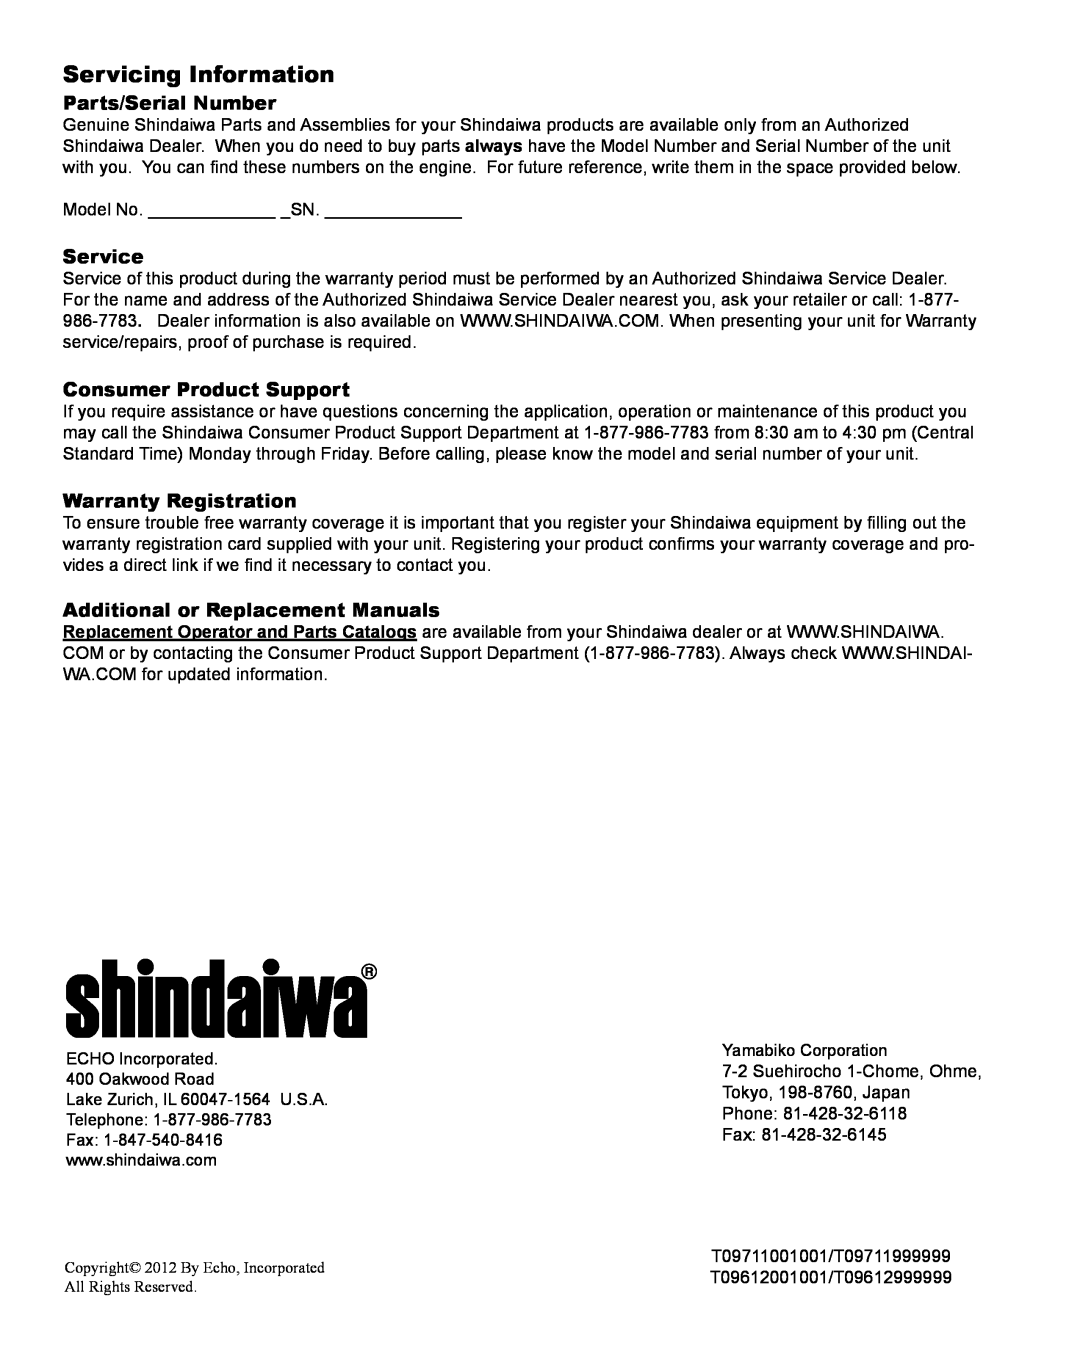 Shindaiwa X7502824801 Servicing Information, Parts/Serial Number, Service, Consumer Product Support, Warranty Registration 